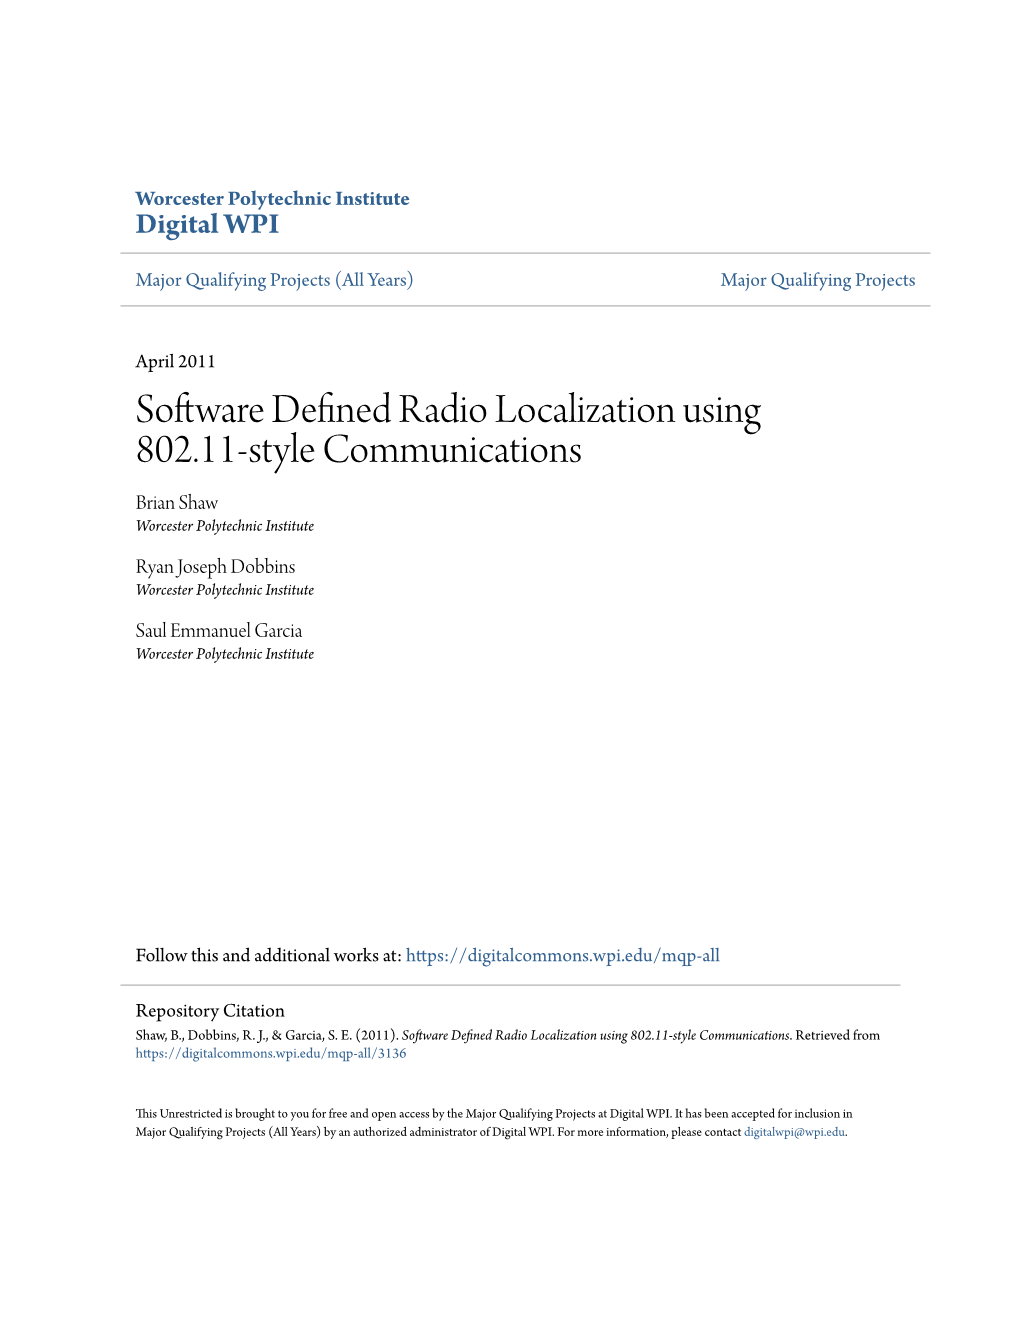 Software Defined Radio Localization Using 802.11-Style Communications Brian Shaw Worcester Polytechnic Institute